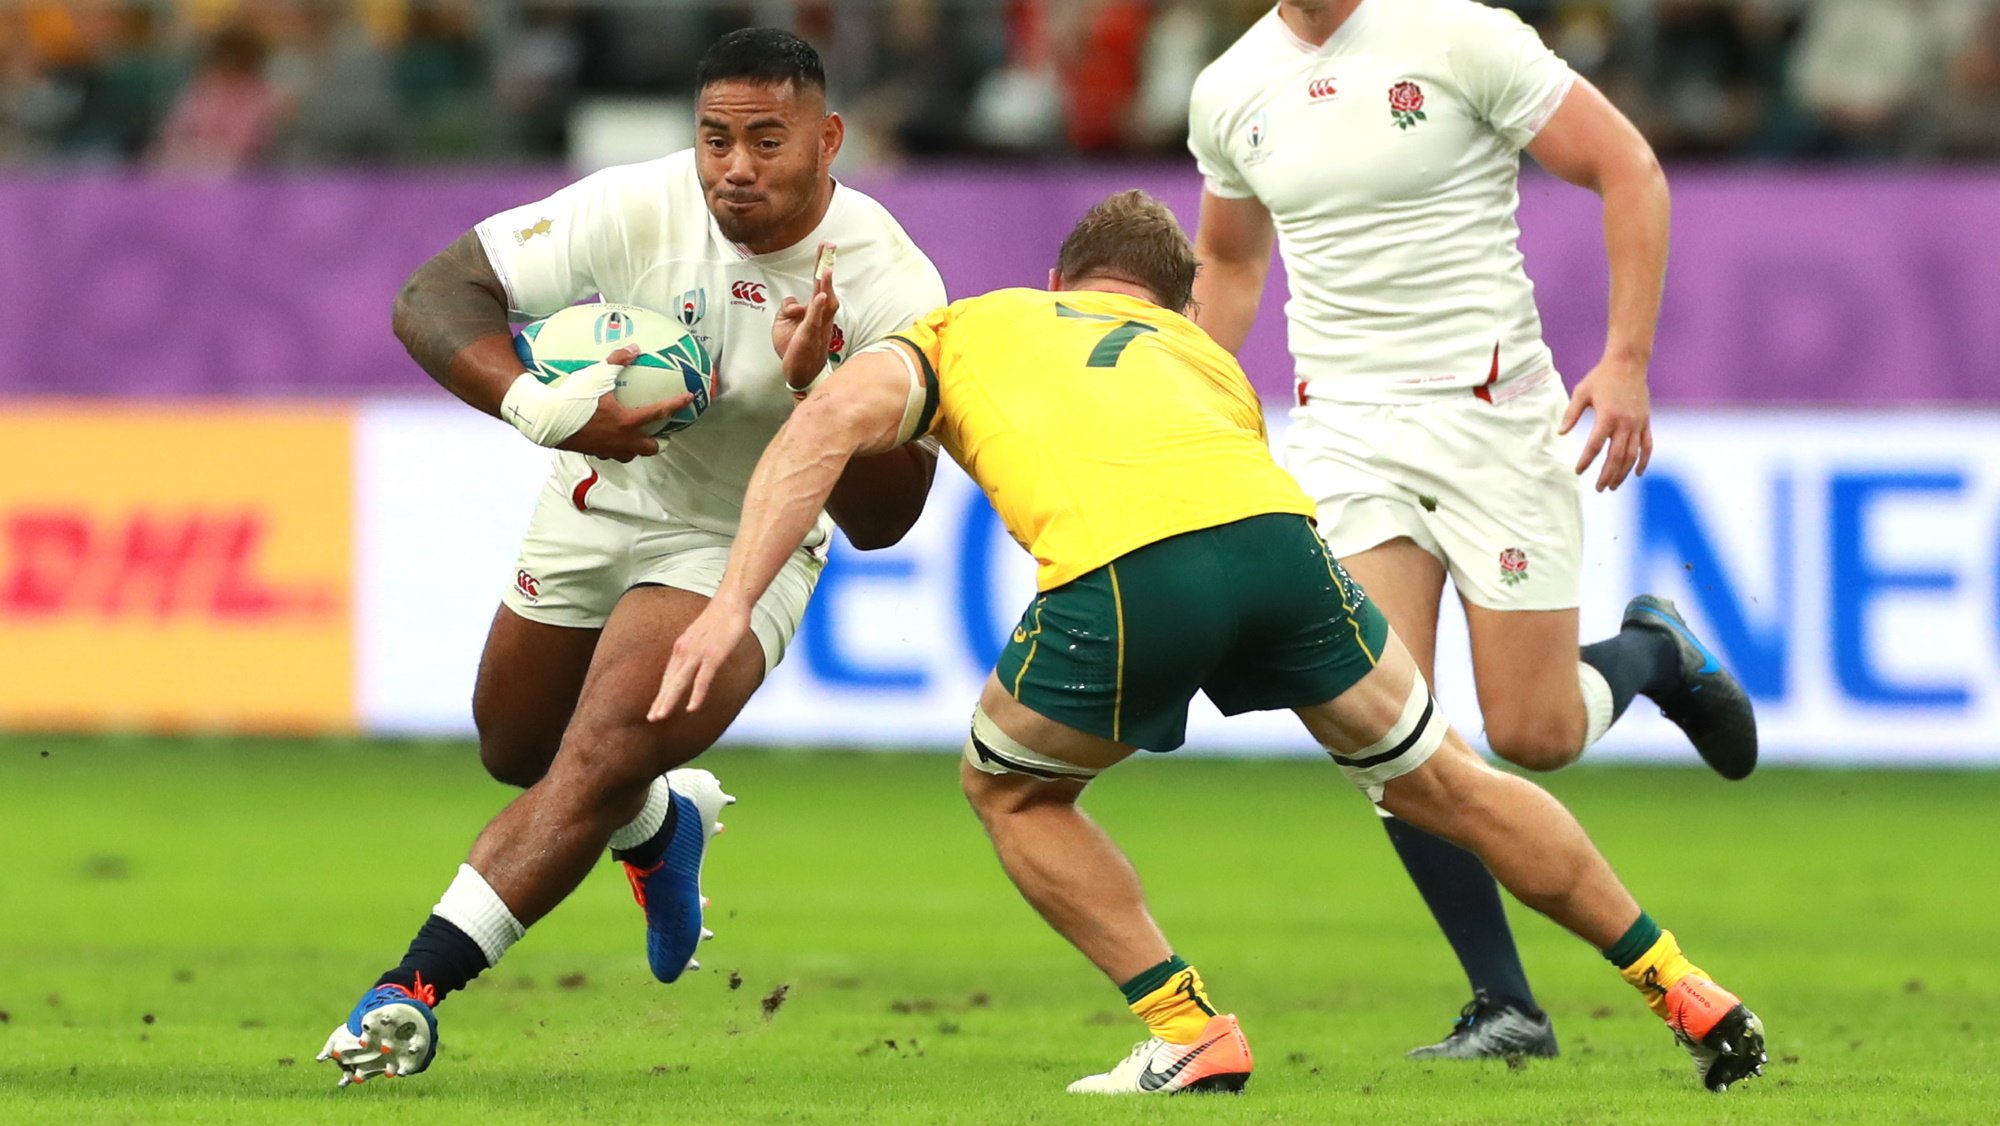 England vs Australia live stream How to watch the rugby online from anywhere Android Central